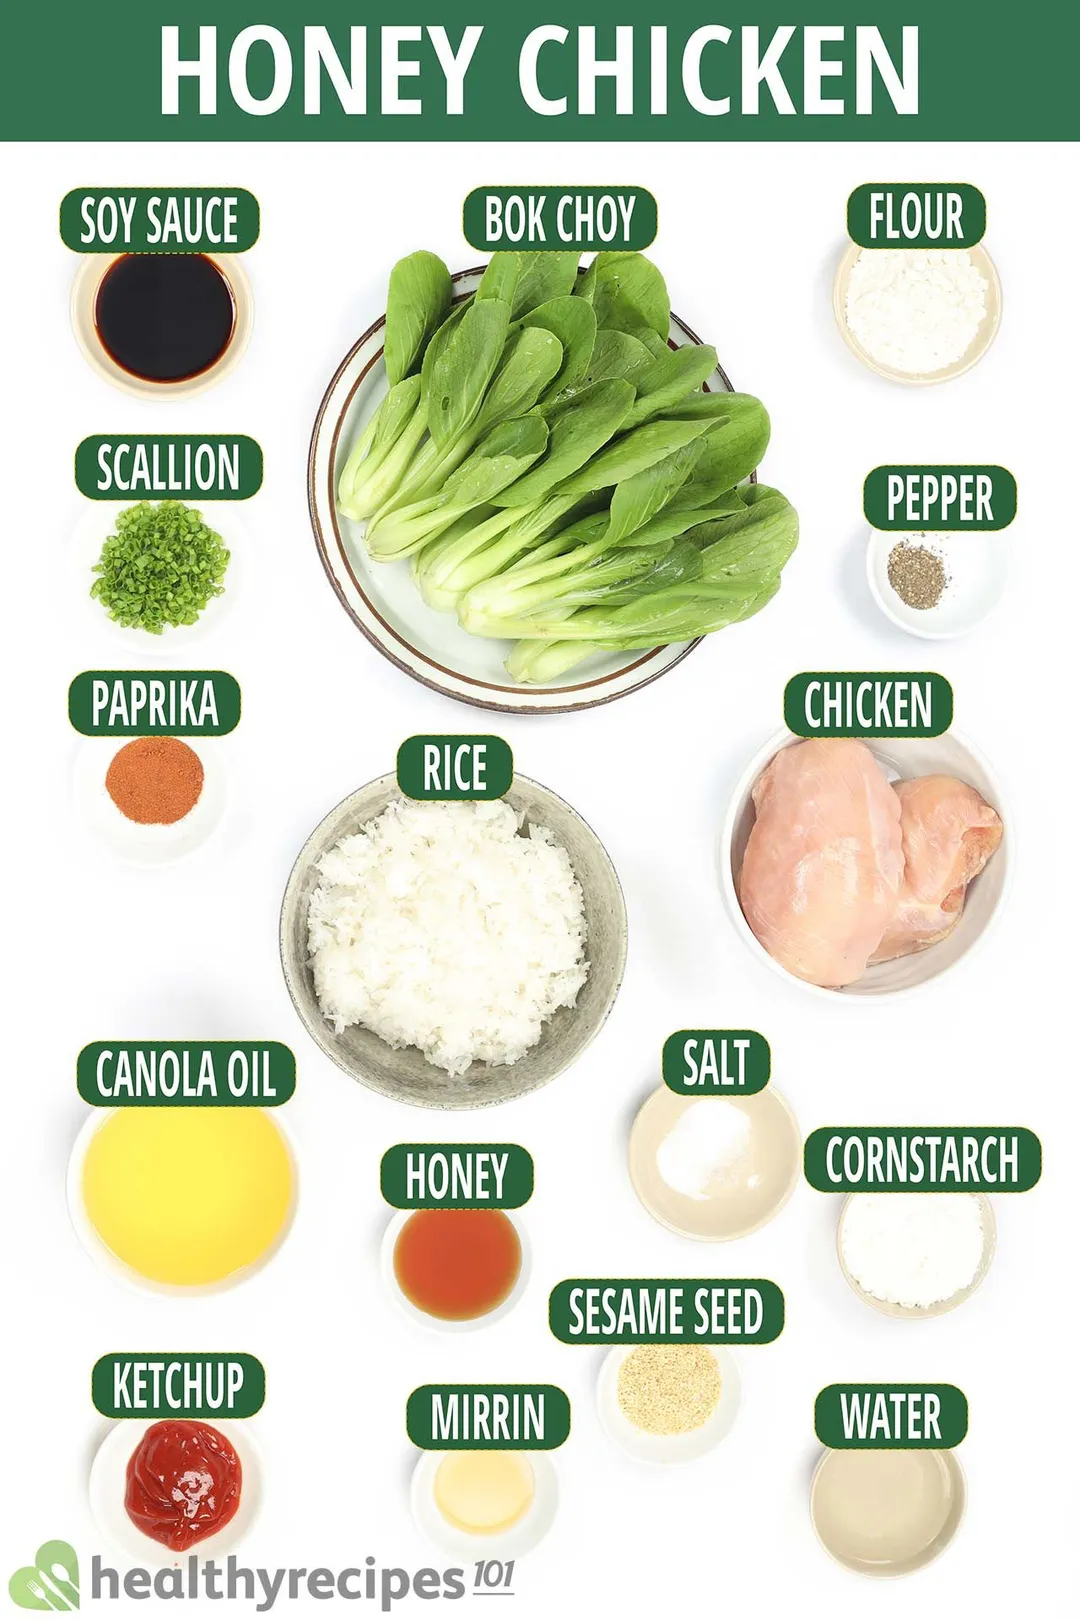 A plate of bok choy, a bowl of white rice, and a small dish of chopped scallions laid near various condiments